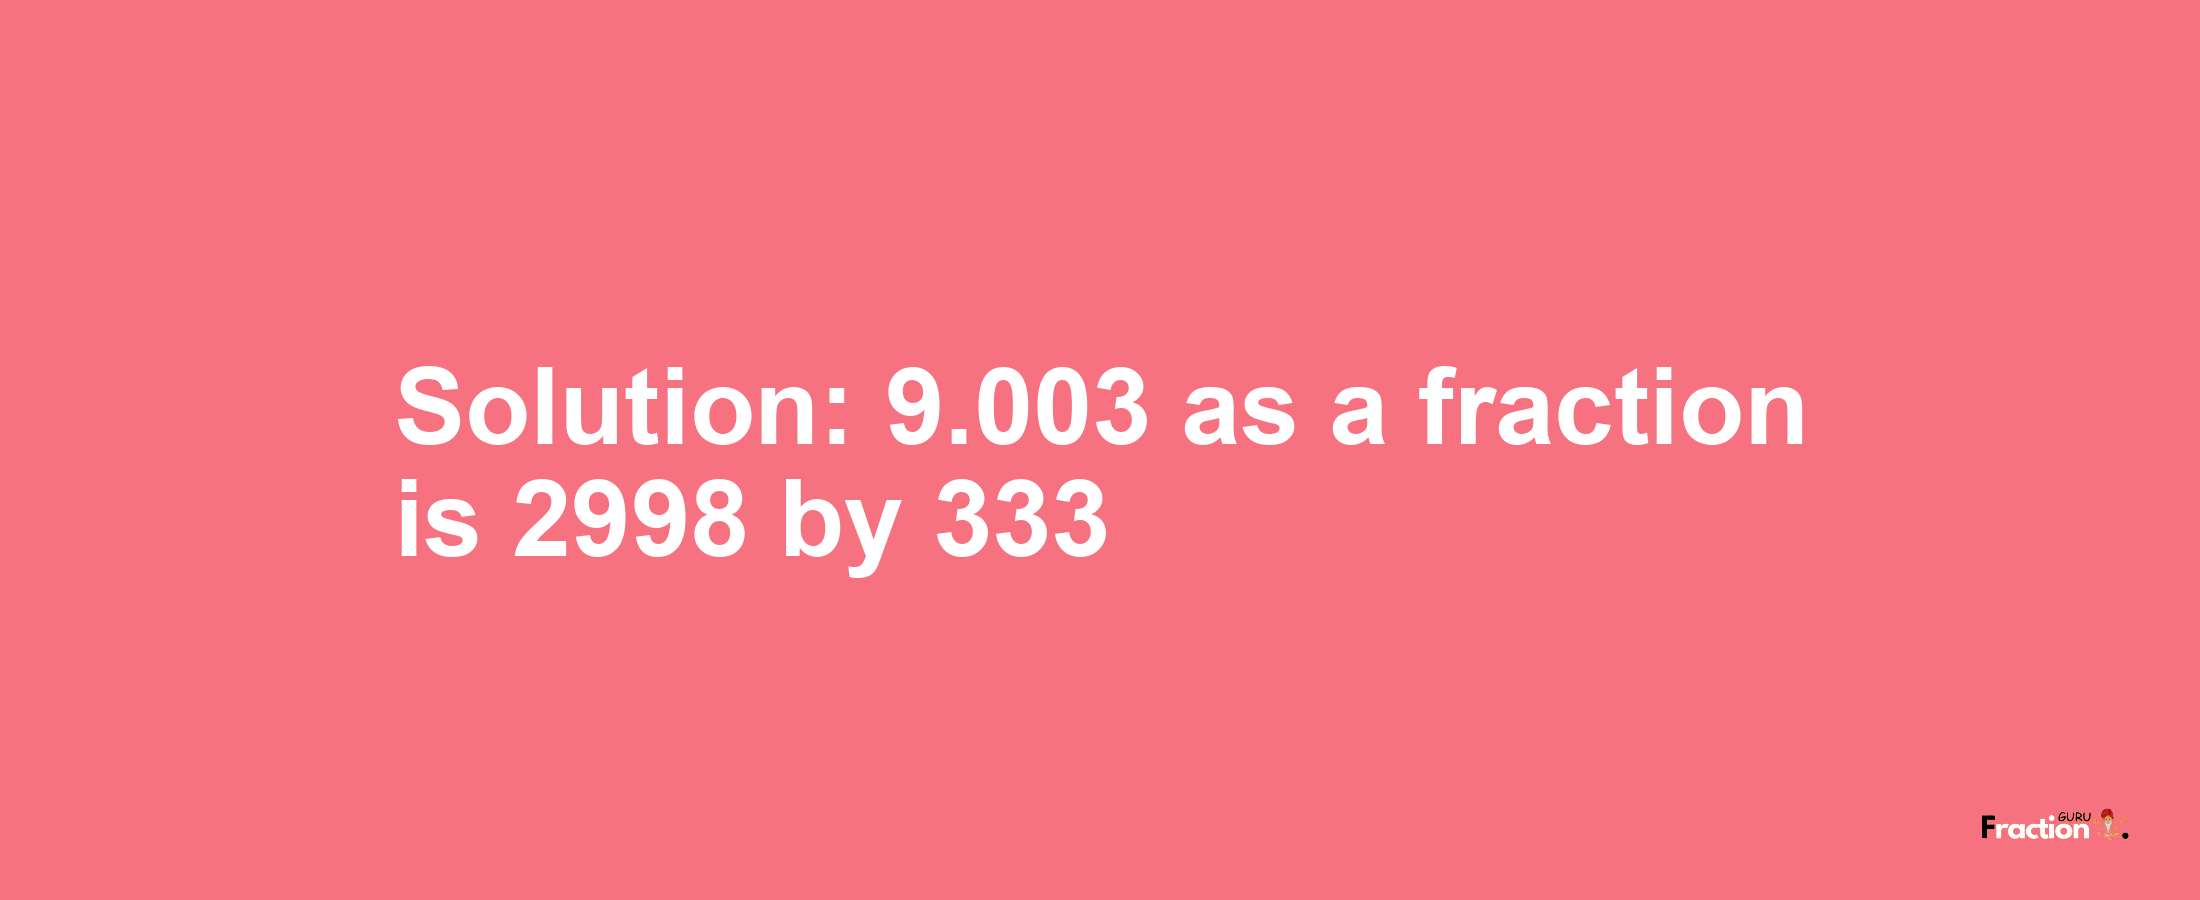 Solution:9.003 as a fraction is 2998/333